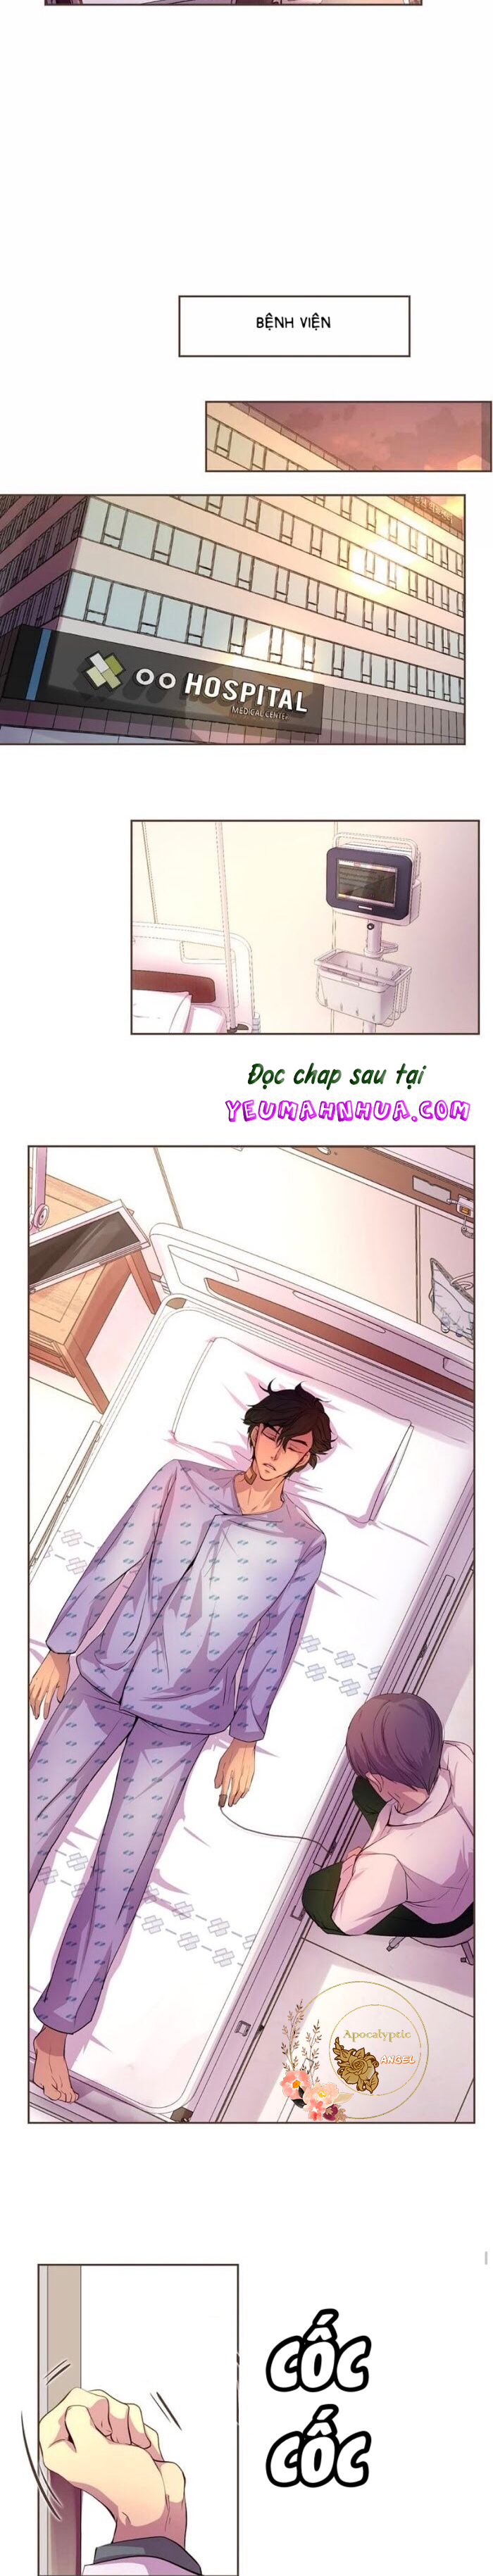 Giữa Em Thật Chặt (Hold Me Tight) Chapter 11 - Trang 13